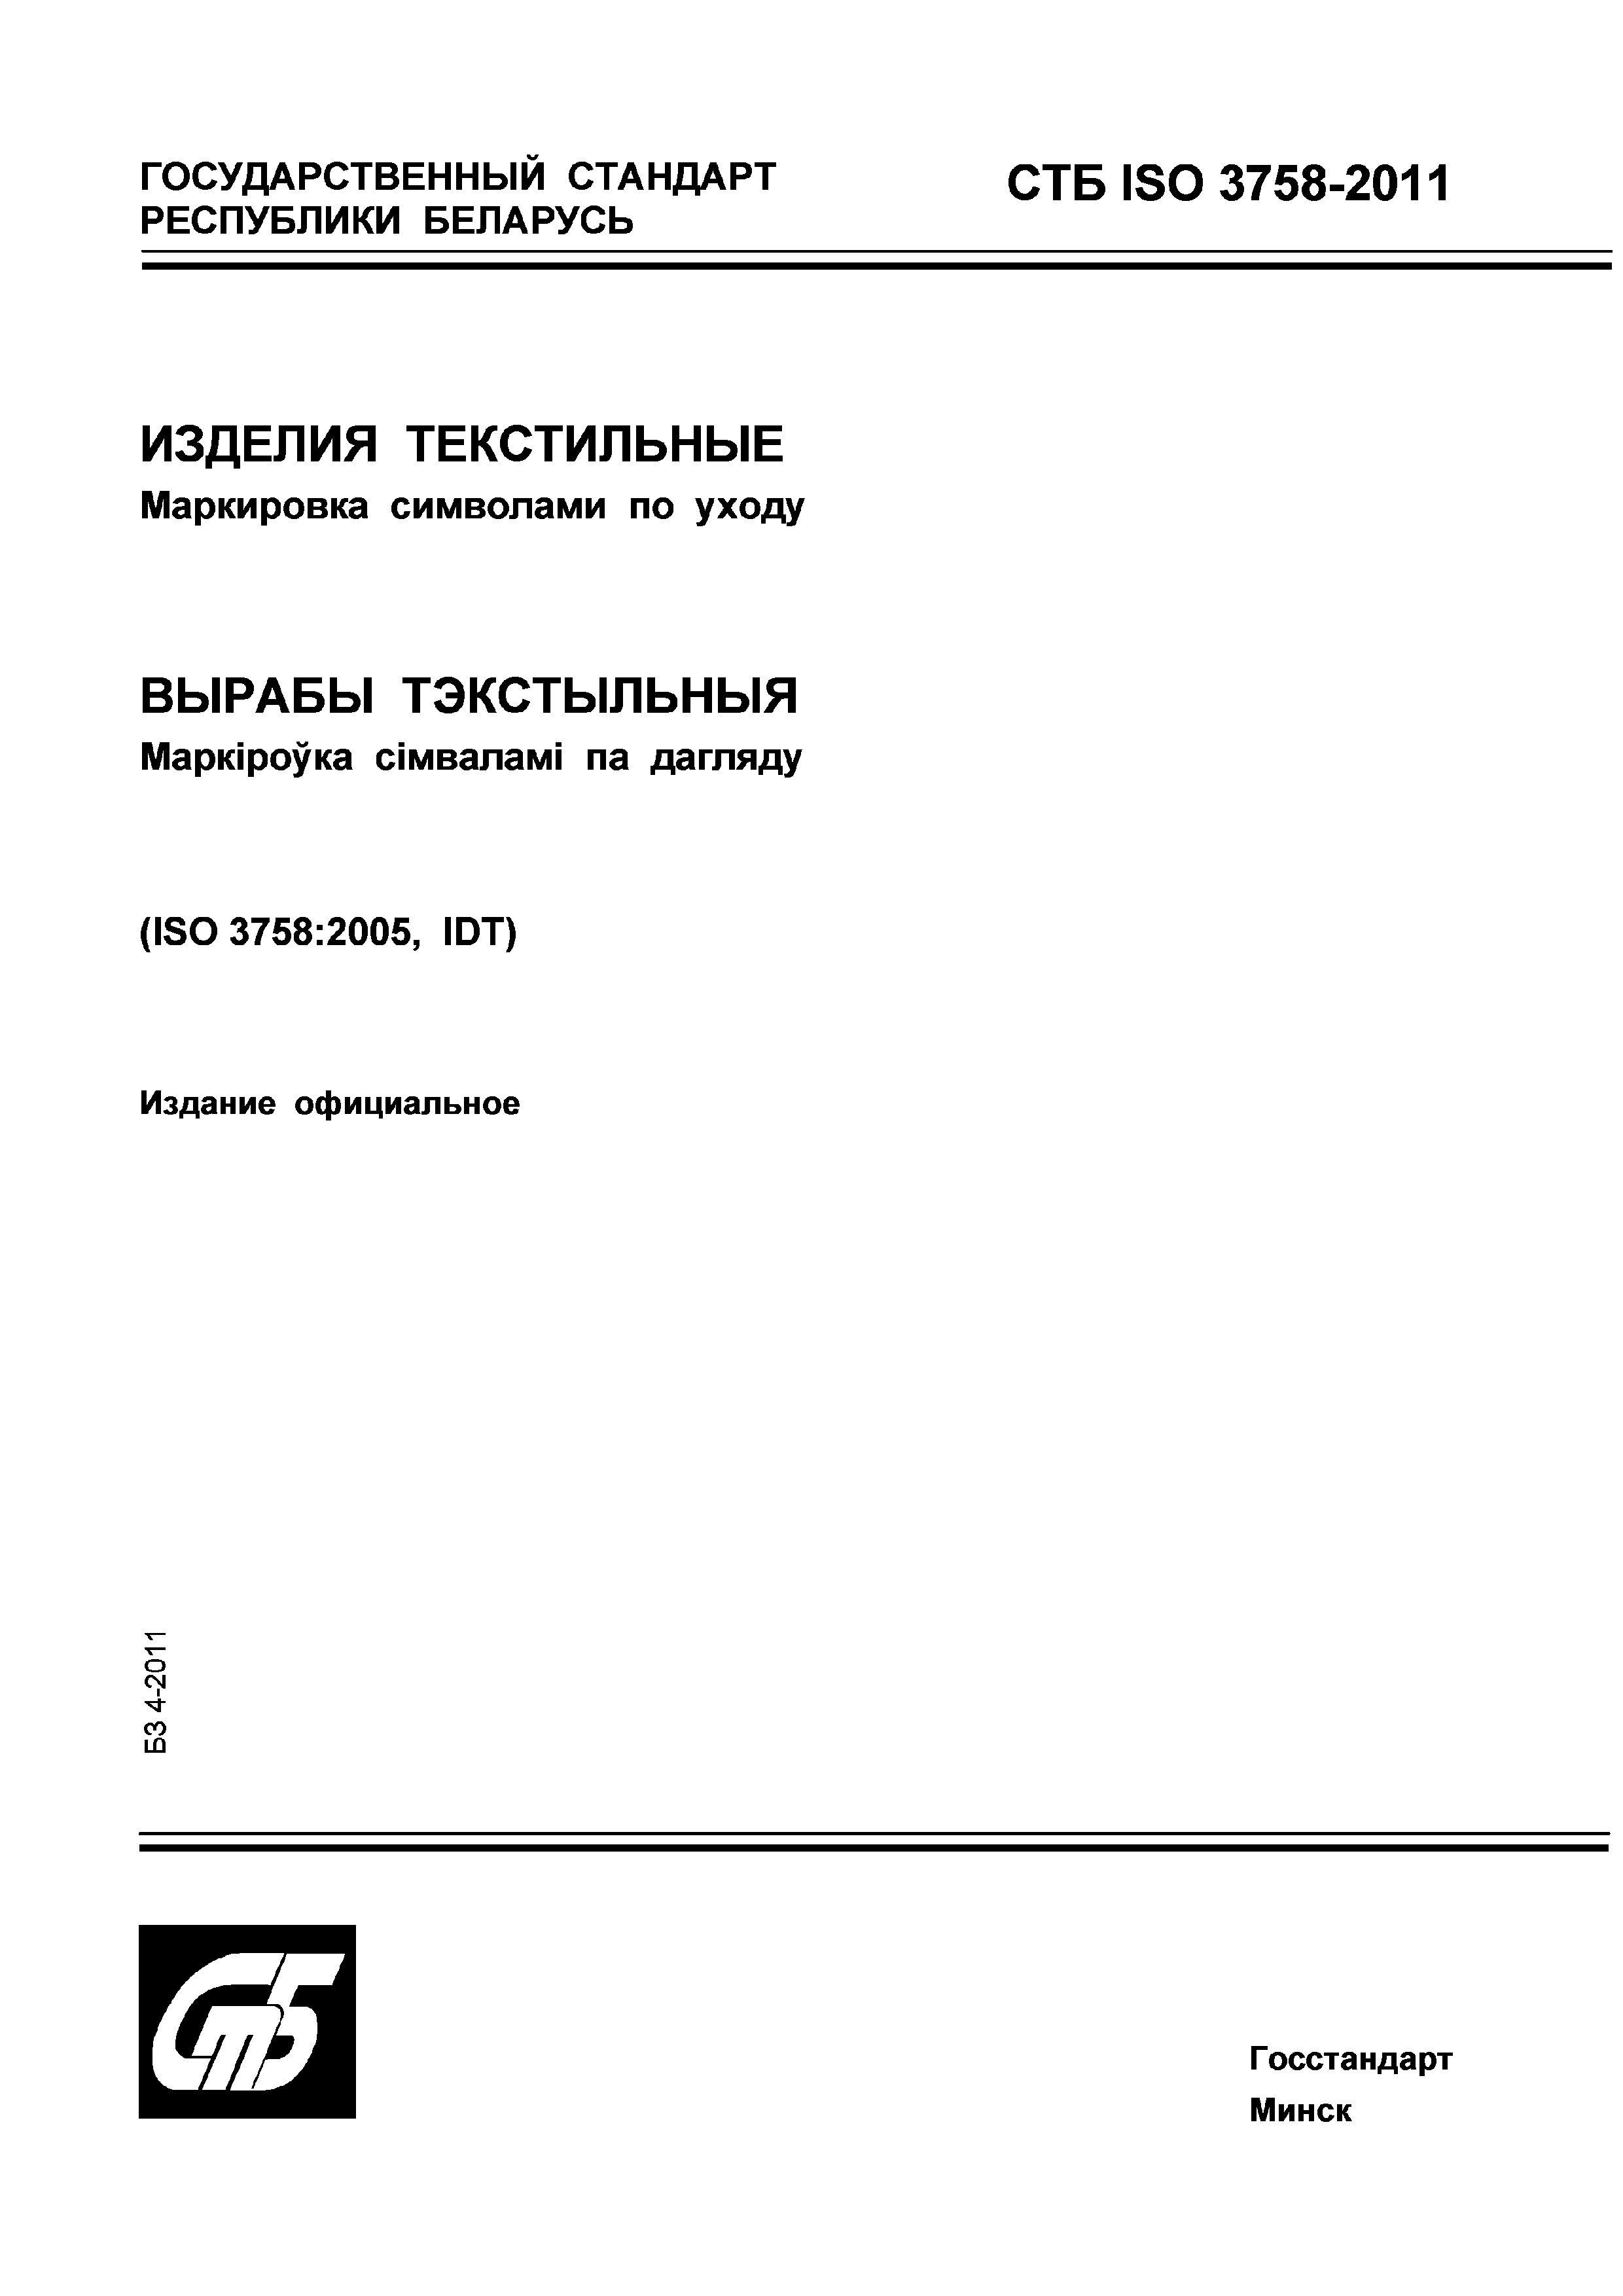 СТБ ISO 3758-2011